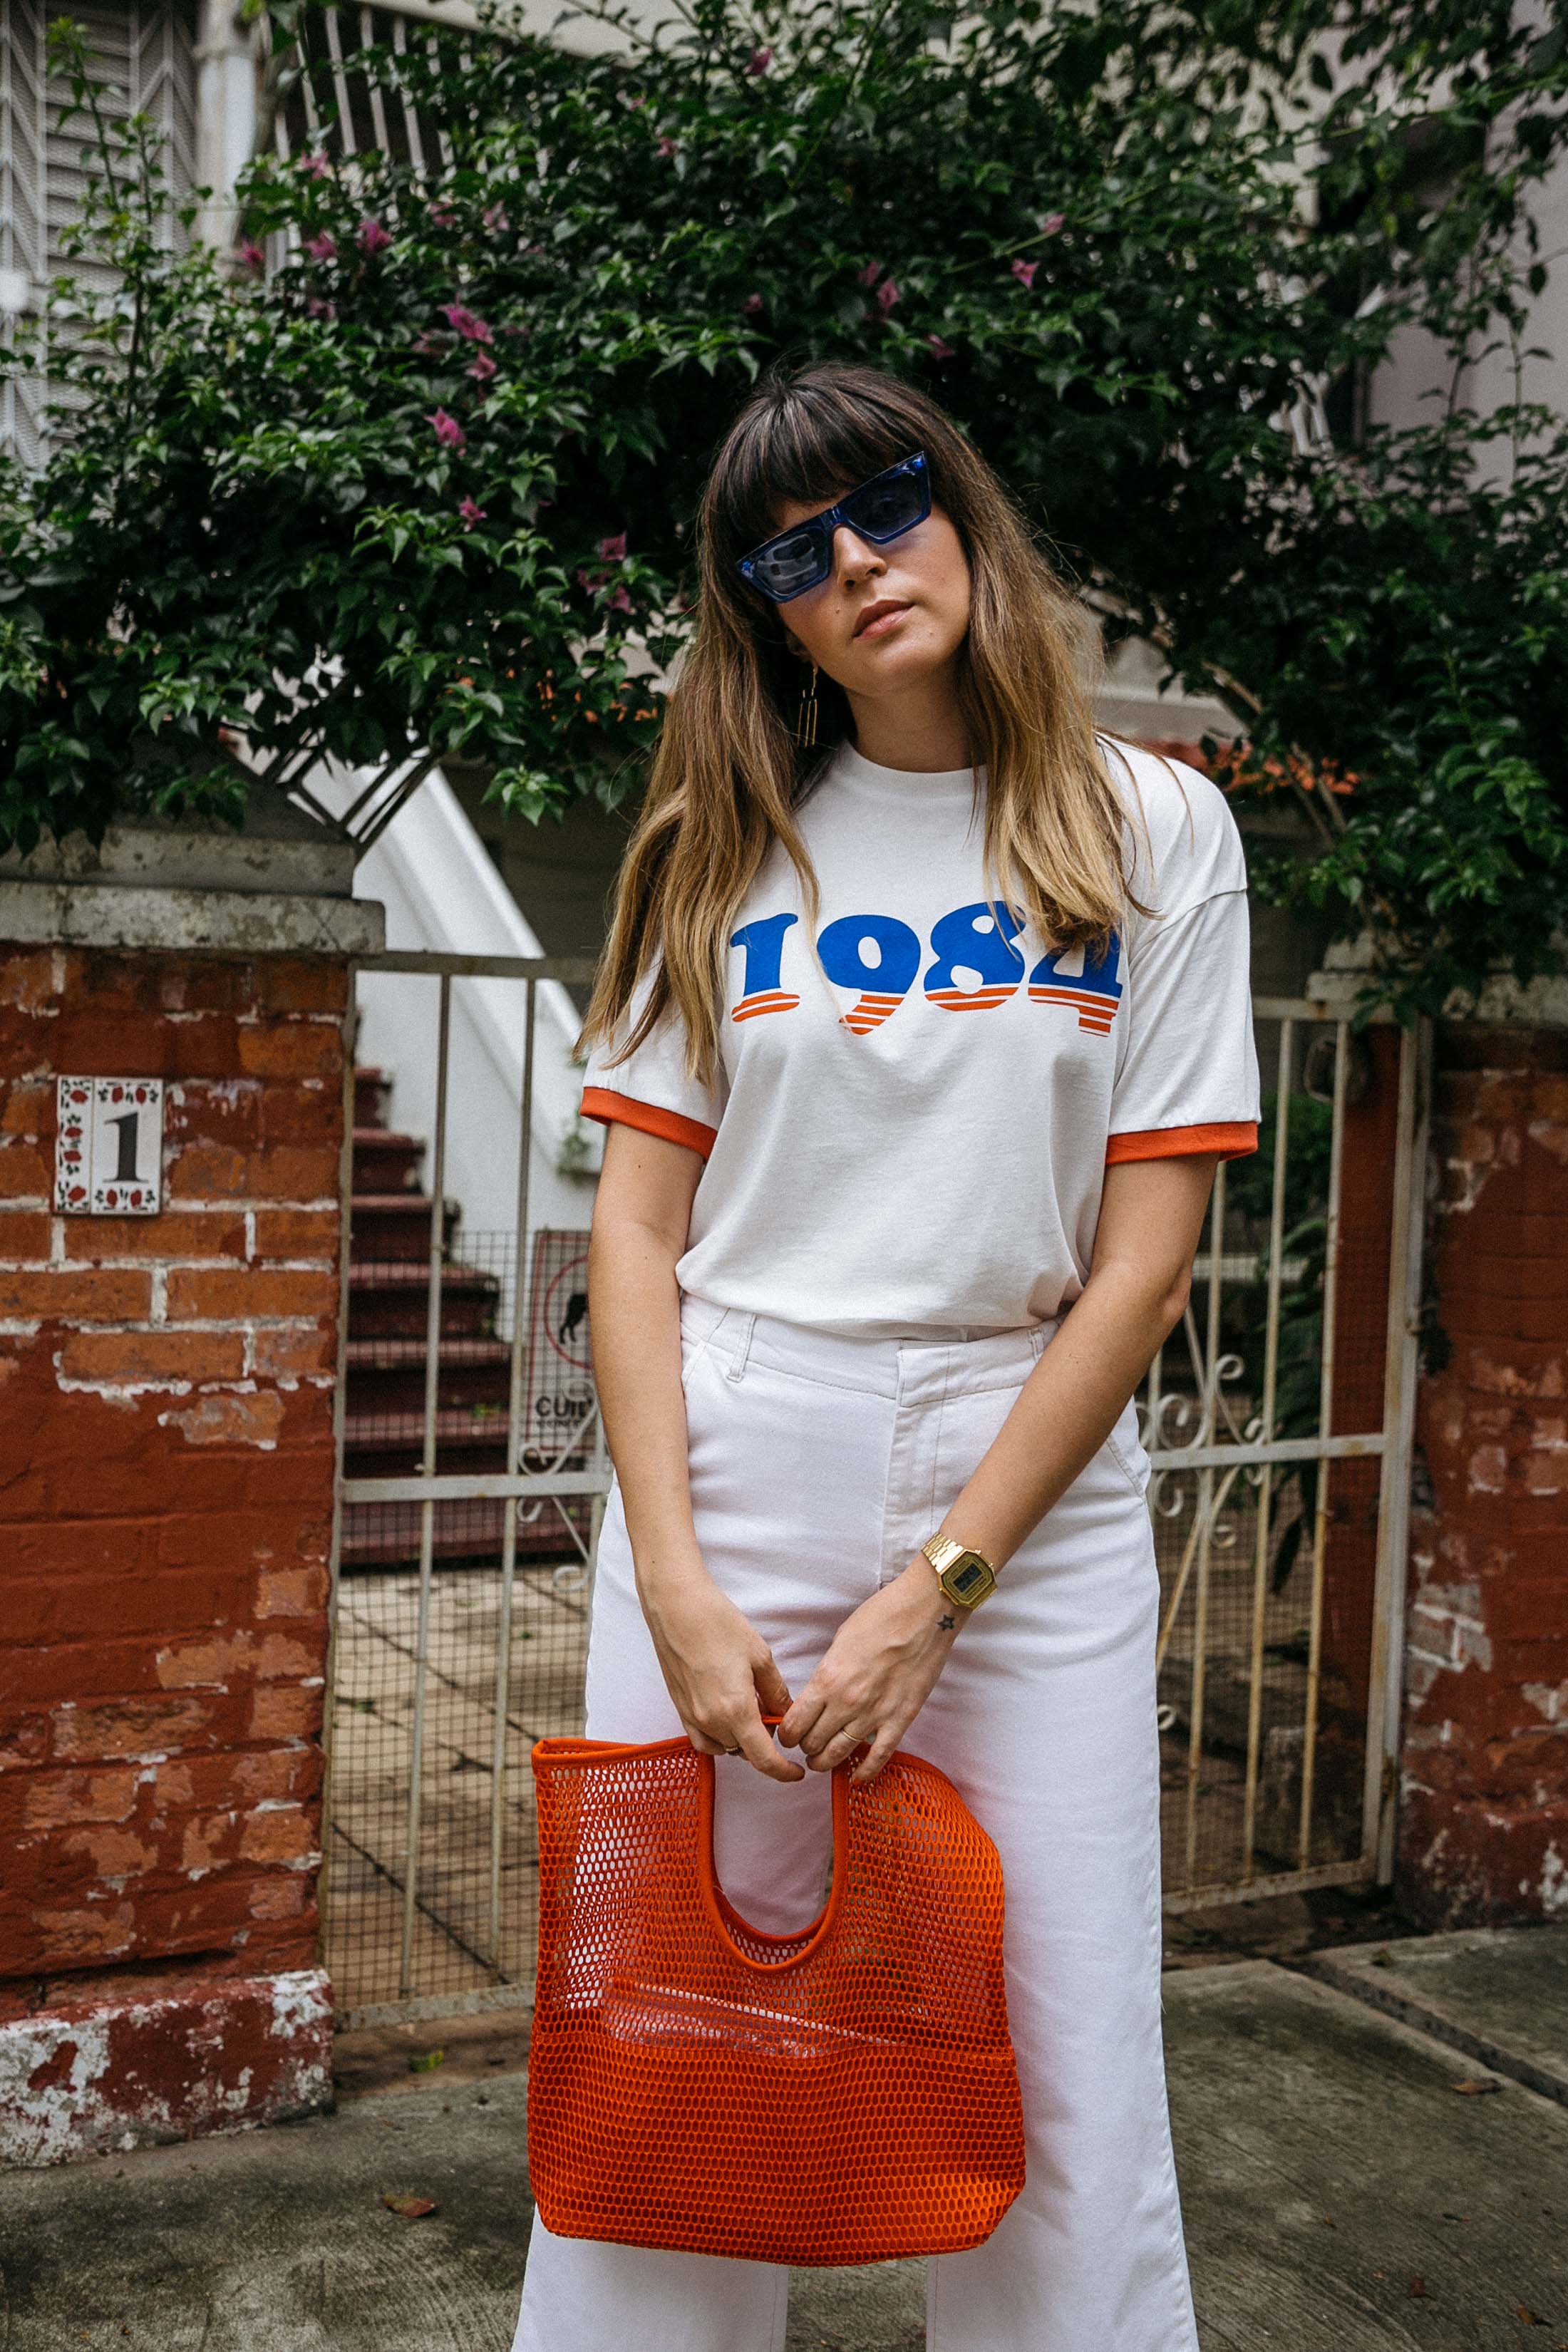 Maristella wears a nostalgic t-shirt and jeans look